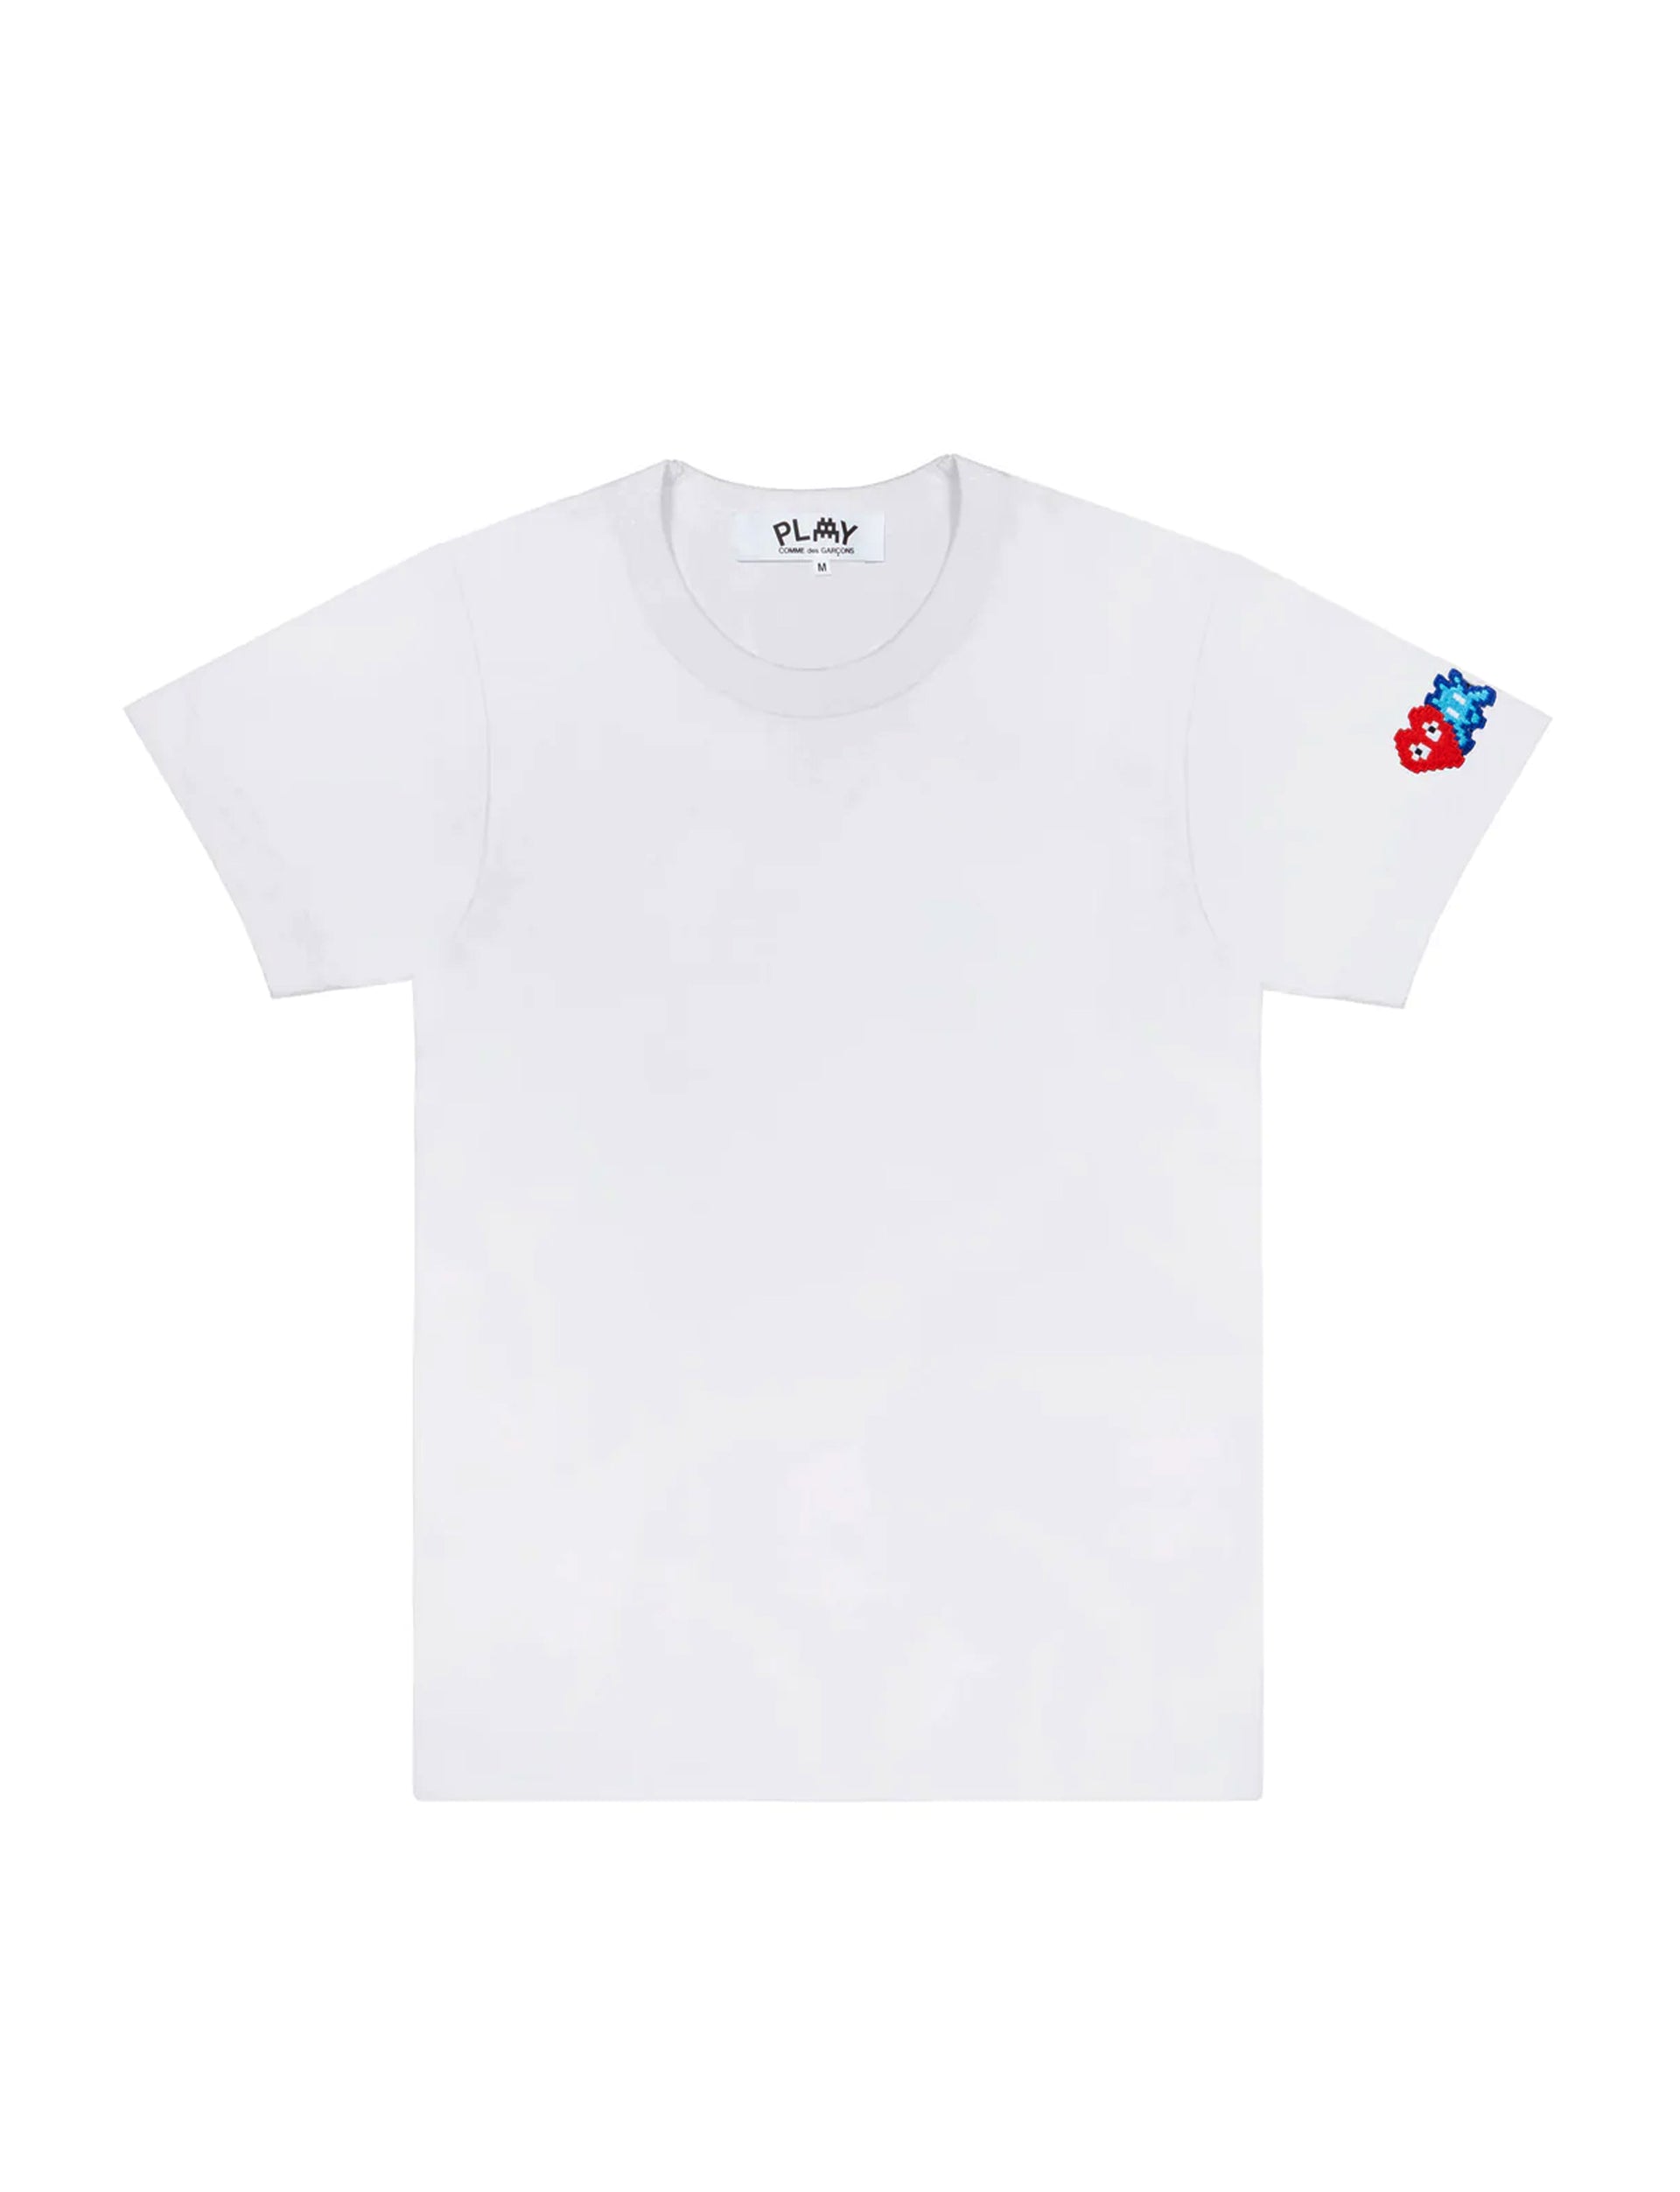 COMME DES GARCONS PLAY X THE ARTIST INVADER WHITE